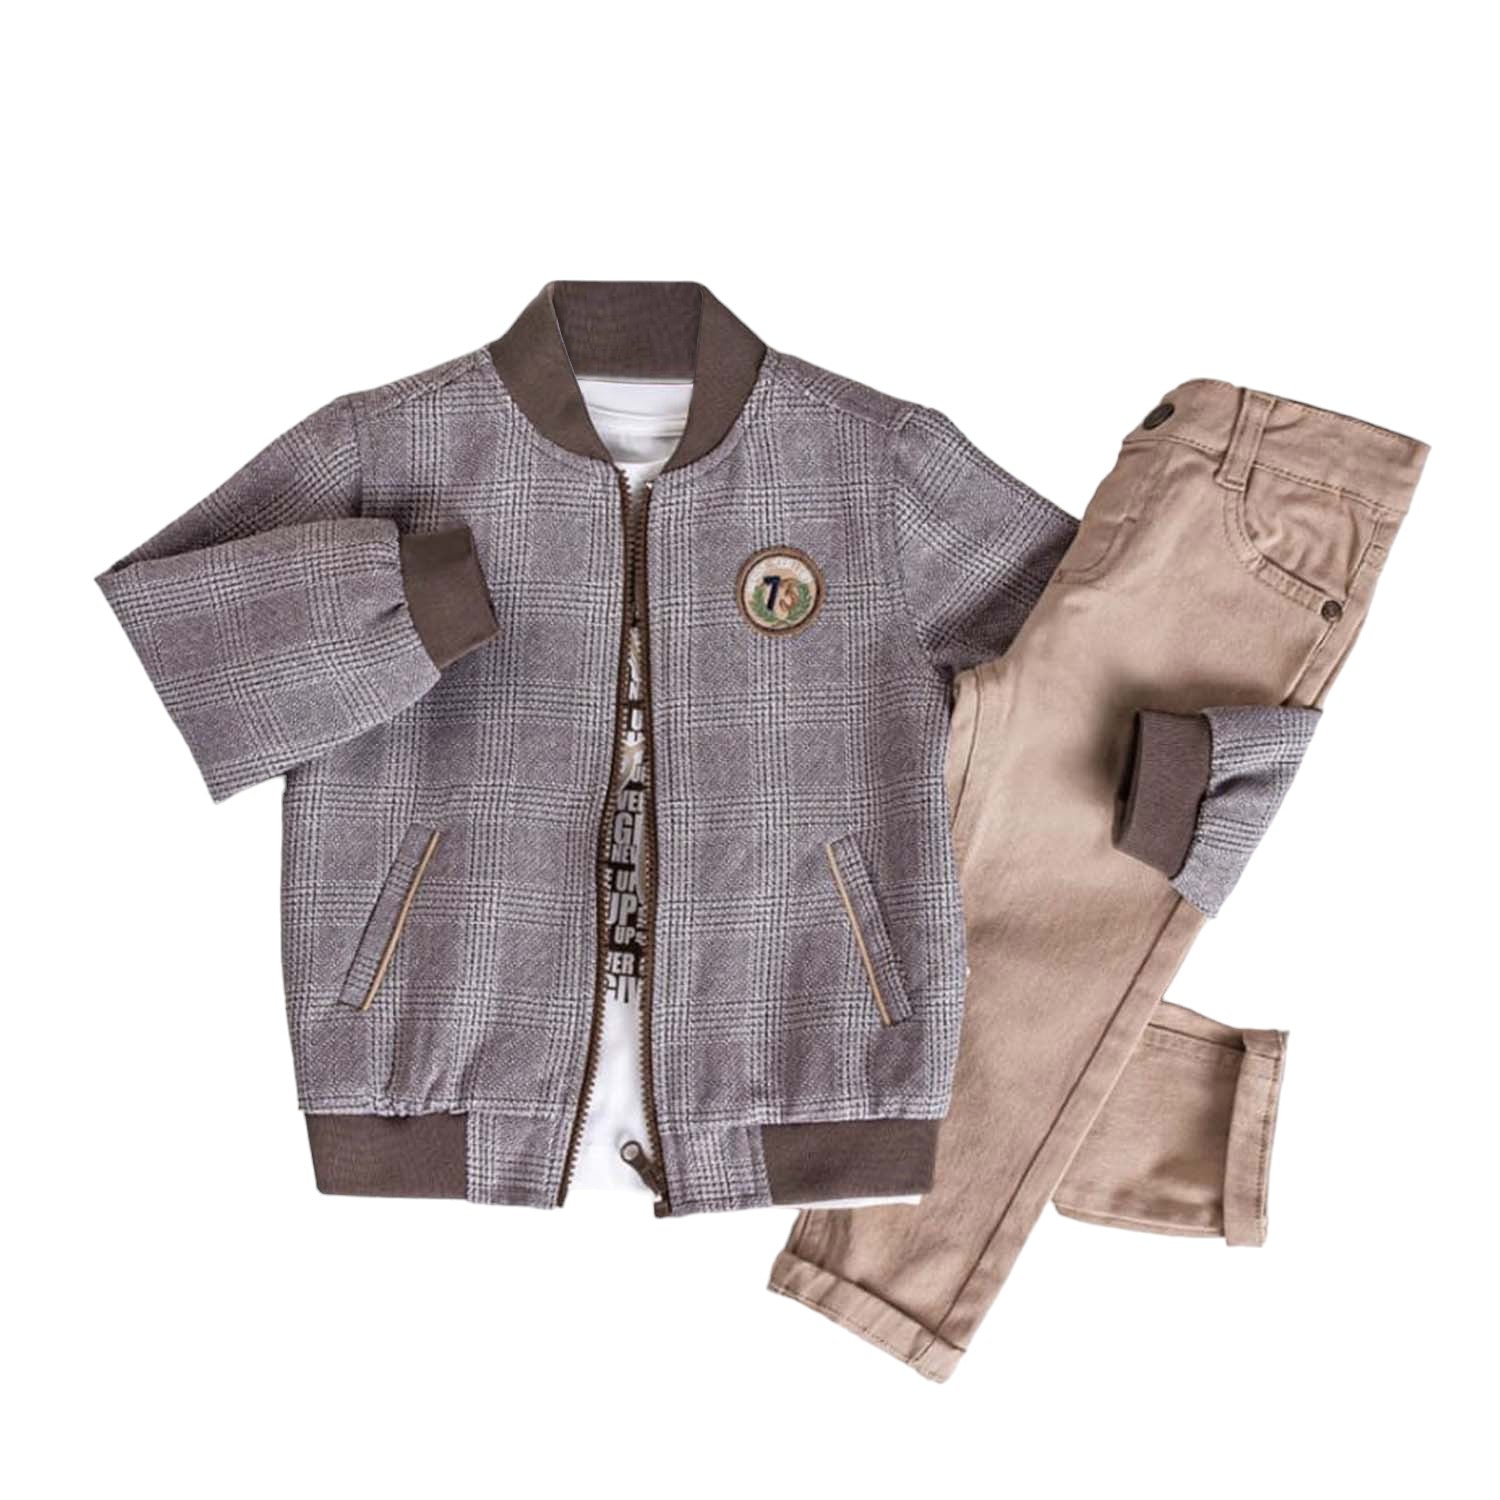 Little Boys' Jacket, T-Shirt and Jeans 3-Piece Set in Comfortable Cotton